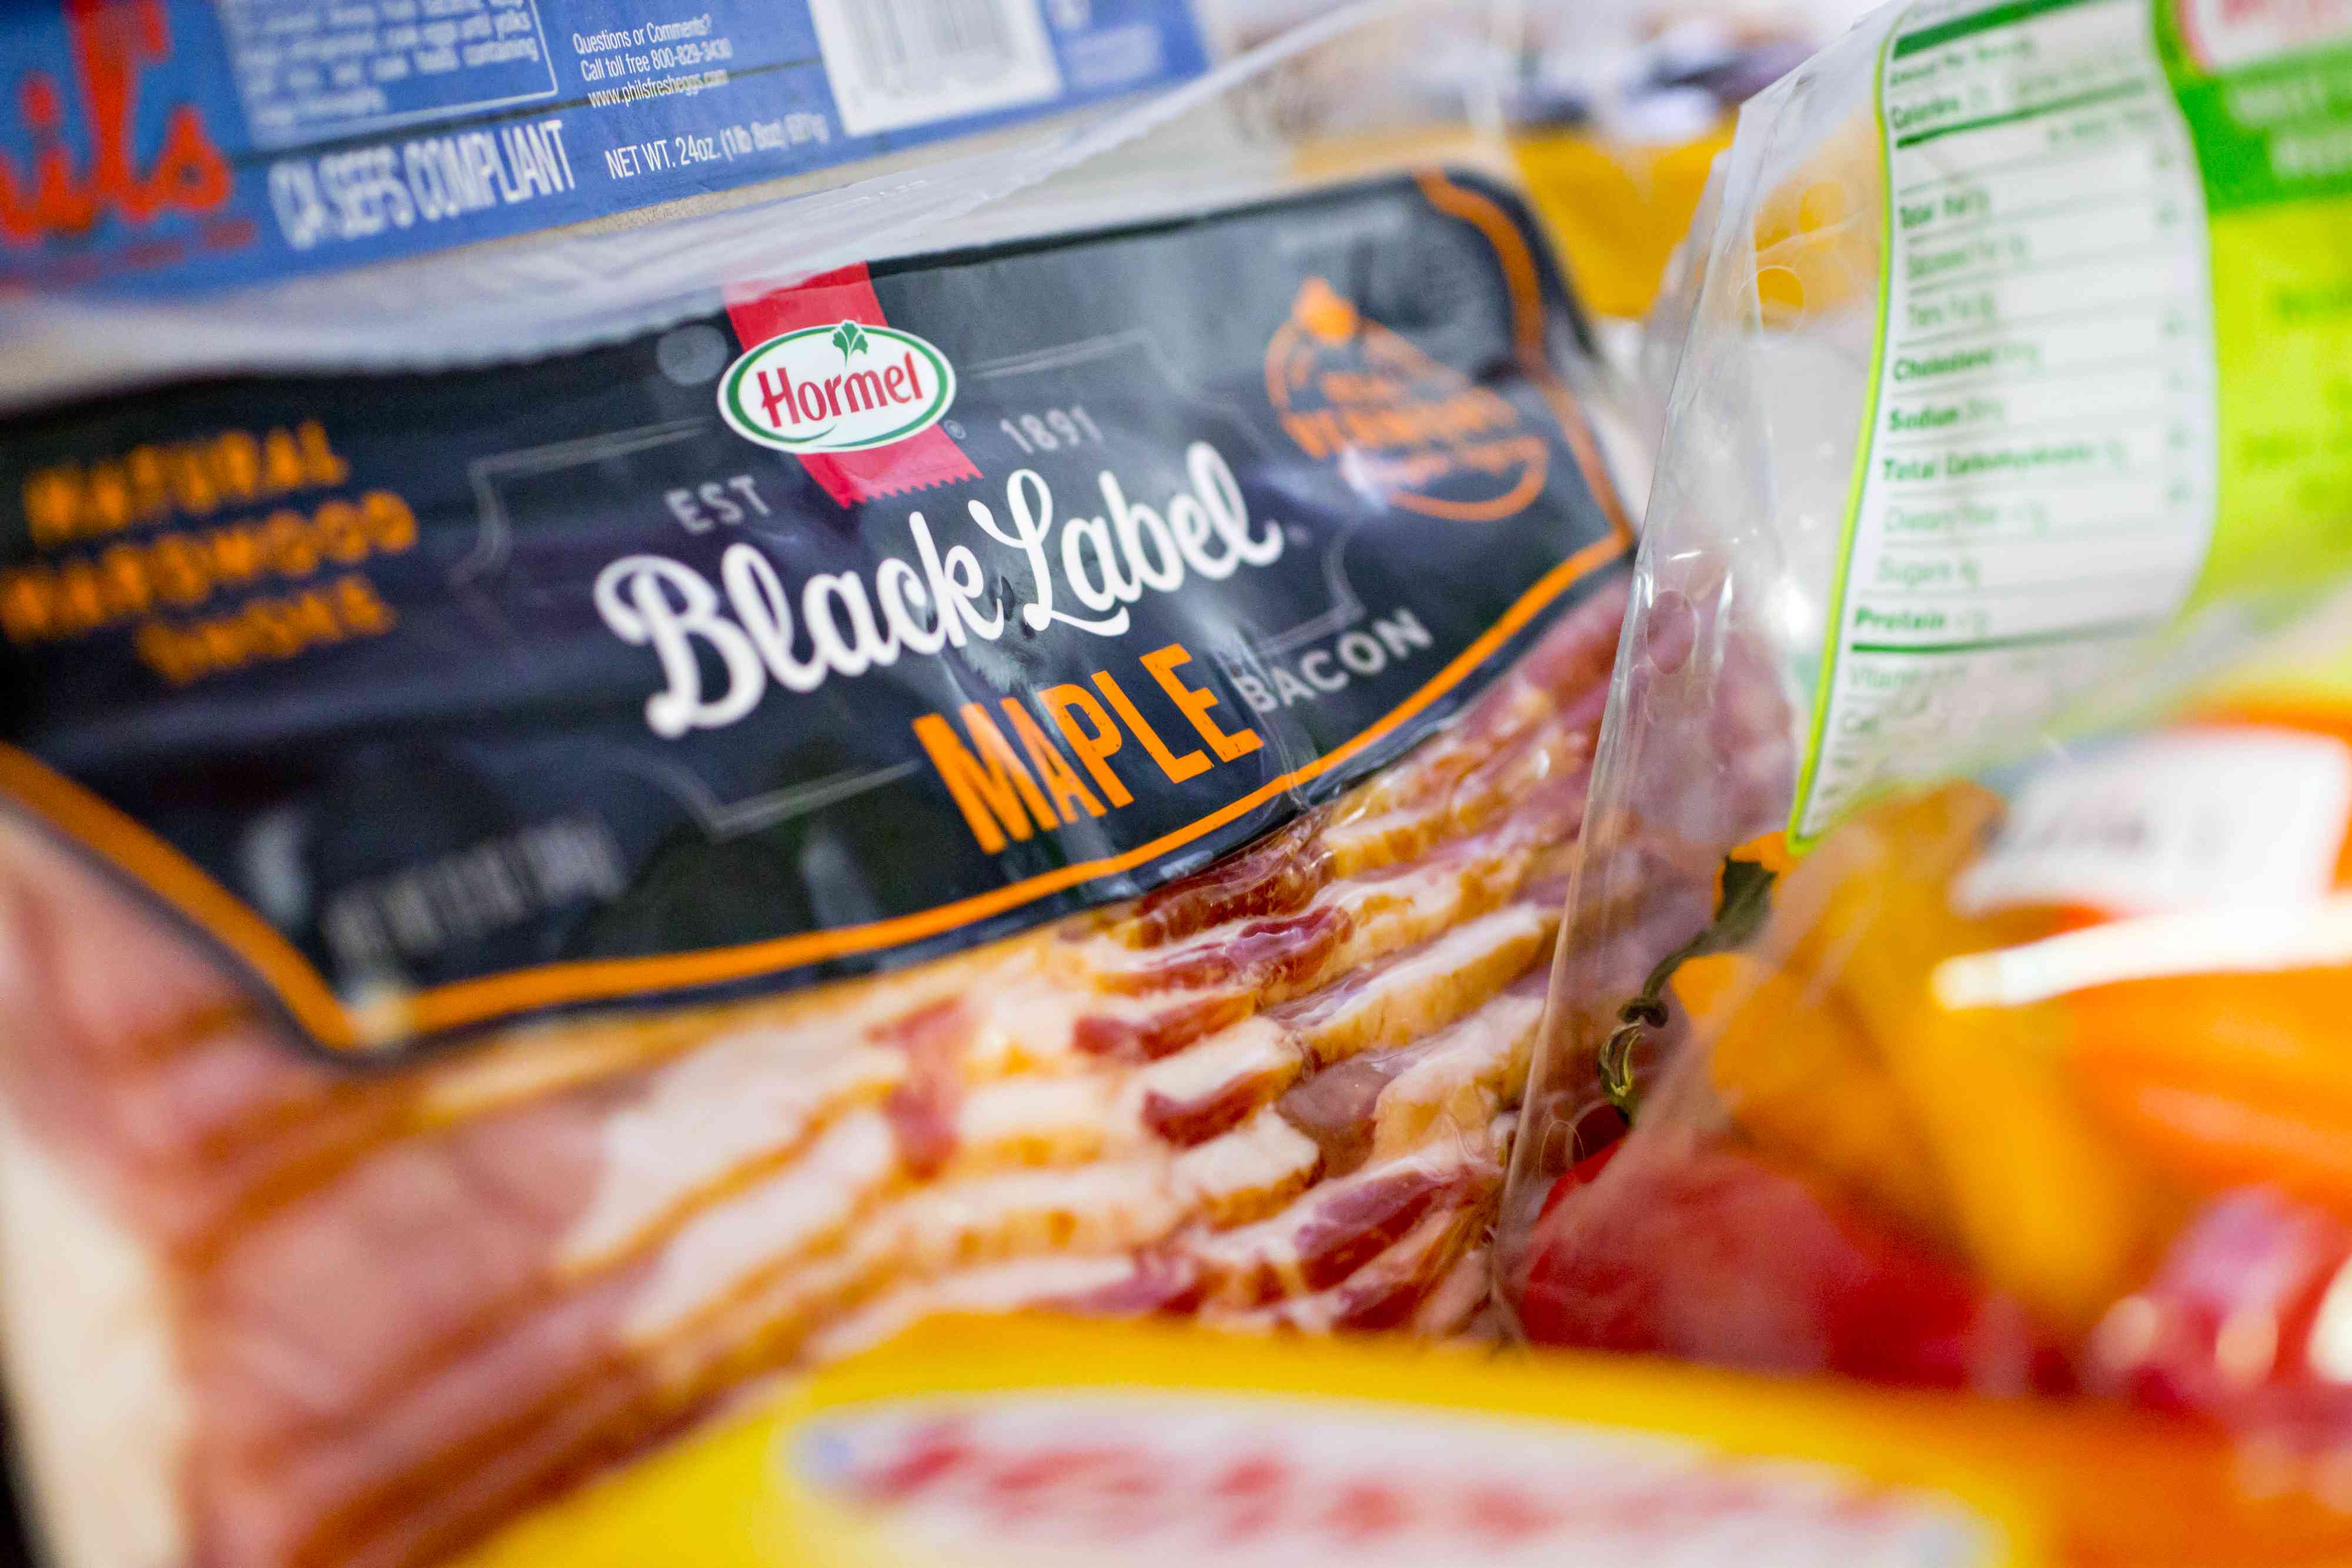 The Only Way You Should Store Bacon, According to Hormel